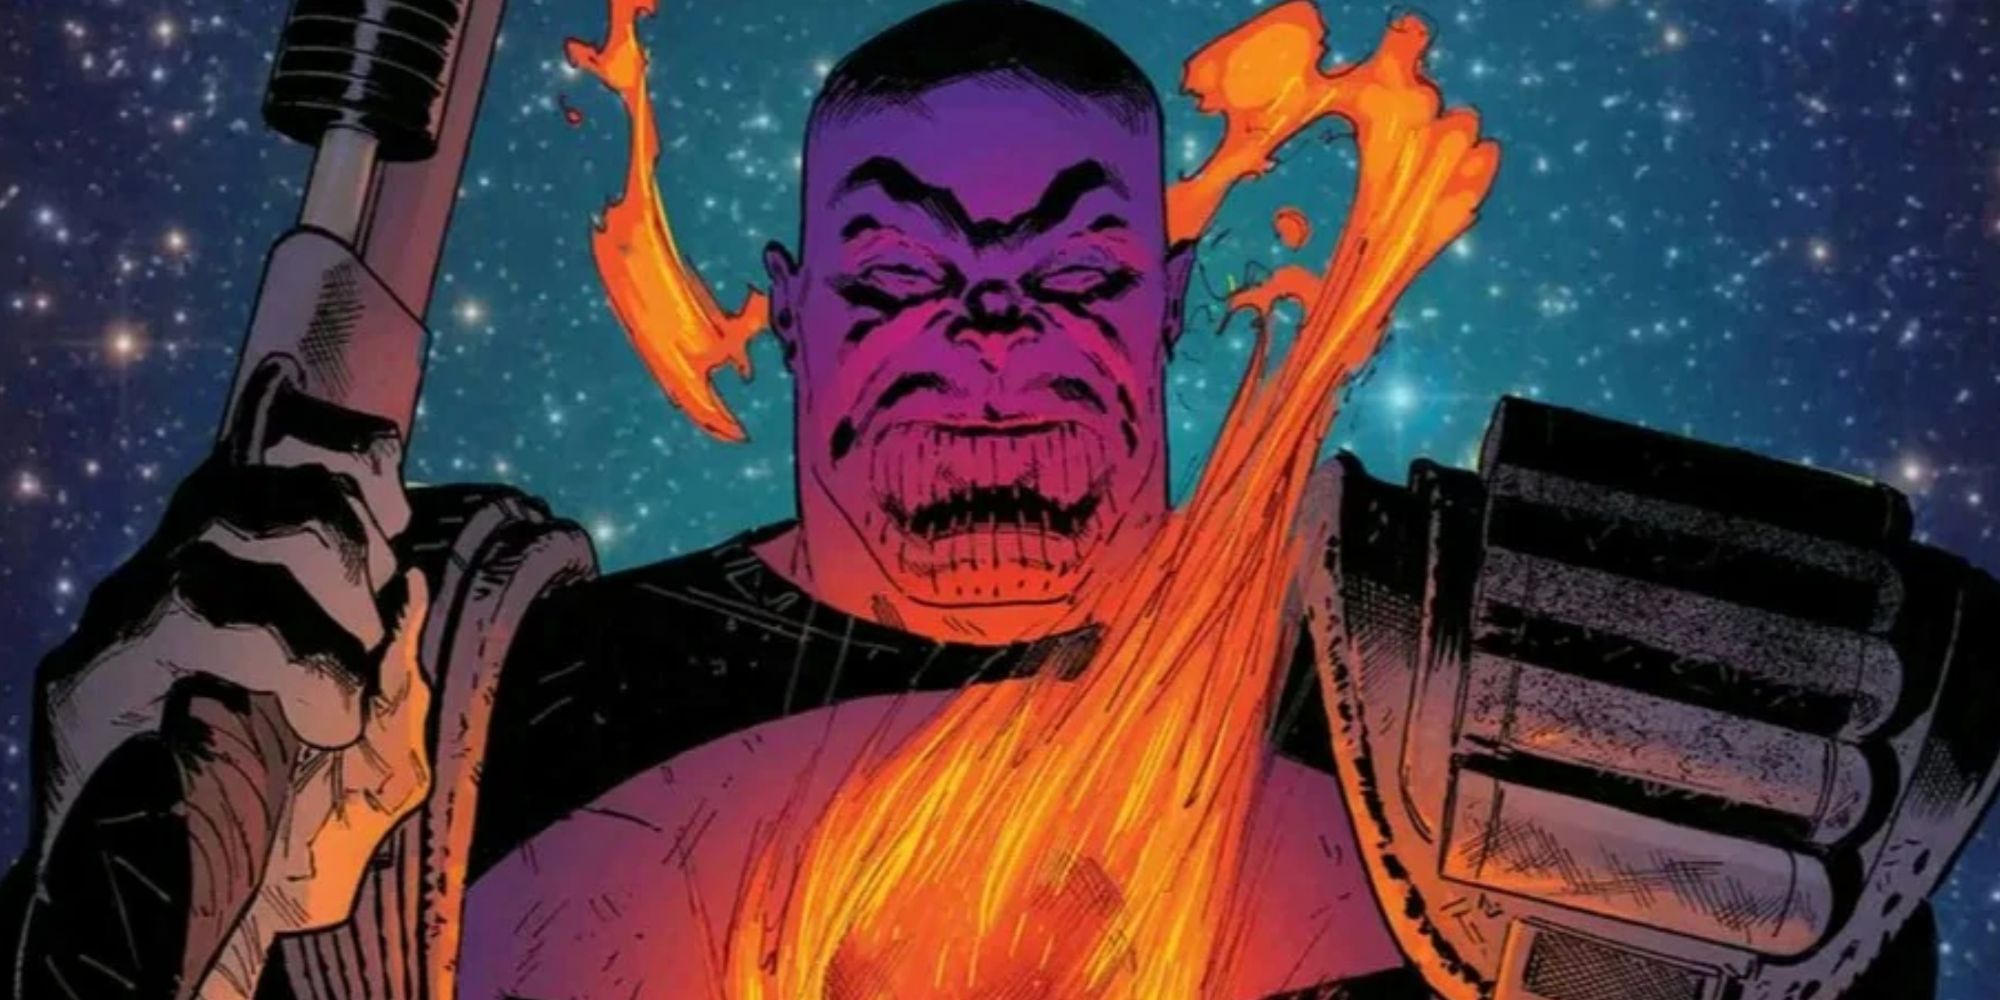 Thanos becomes the Punisher in Marvel Comics.